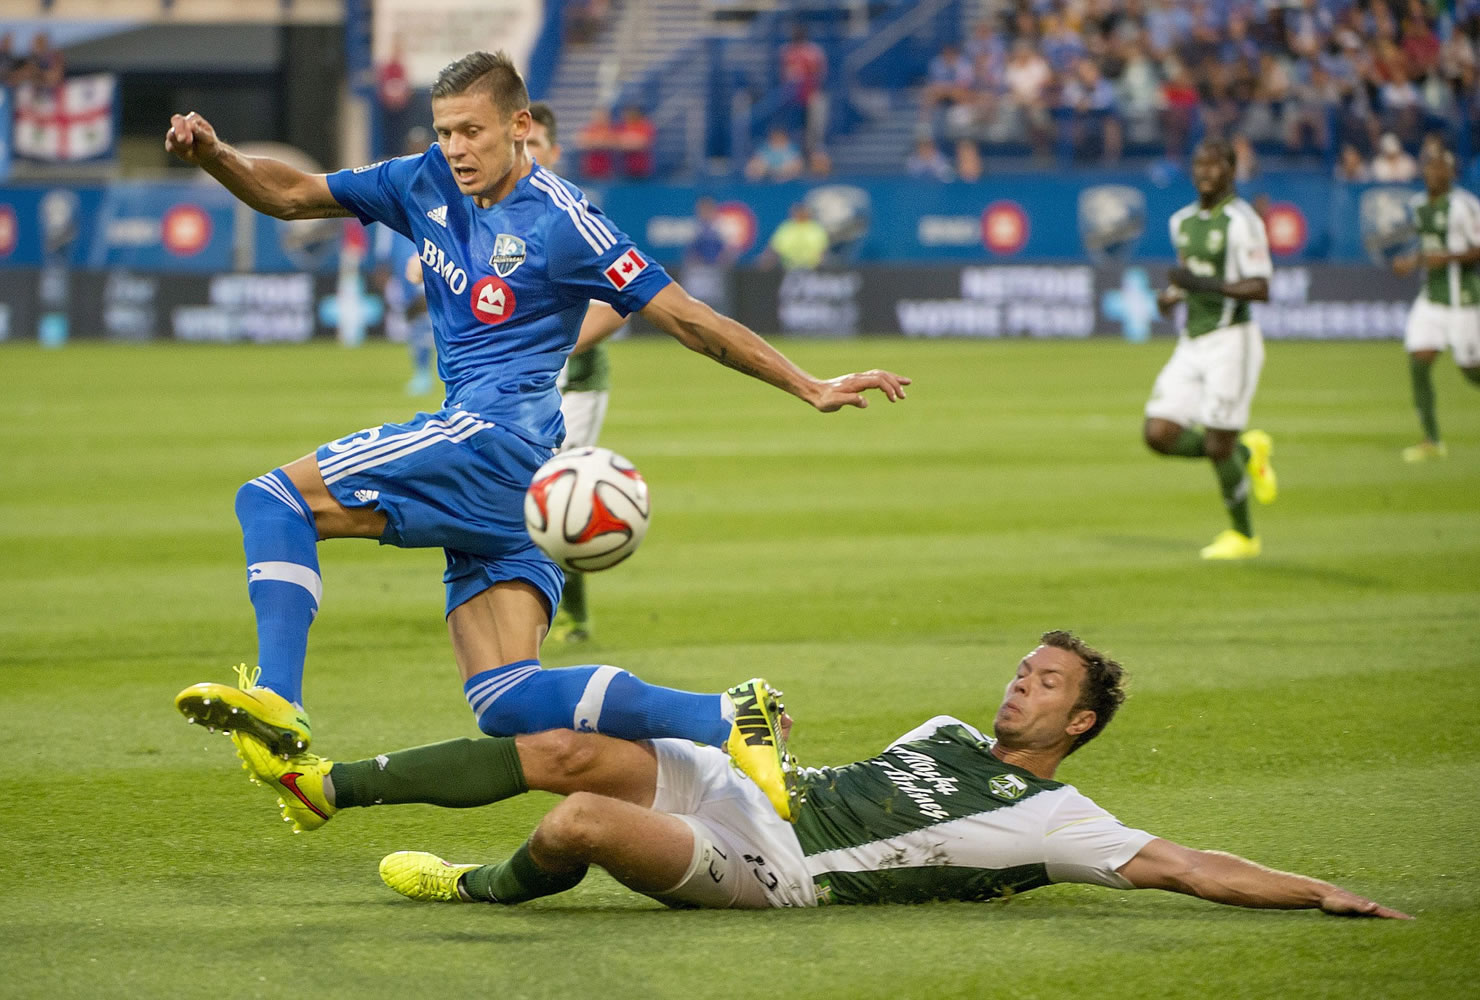 Portland Timbers' Jack Jewsbury, right, slides into Montreal Impact's Krzysztof Krol during first half at Montreal on Sunday, July 27, 2014.